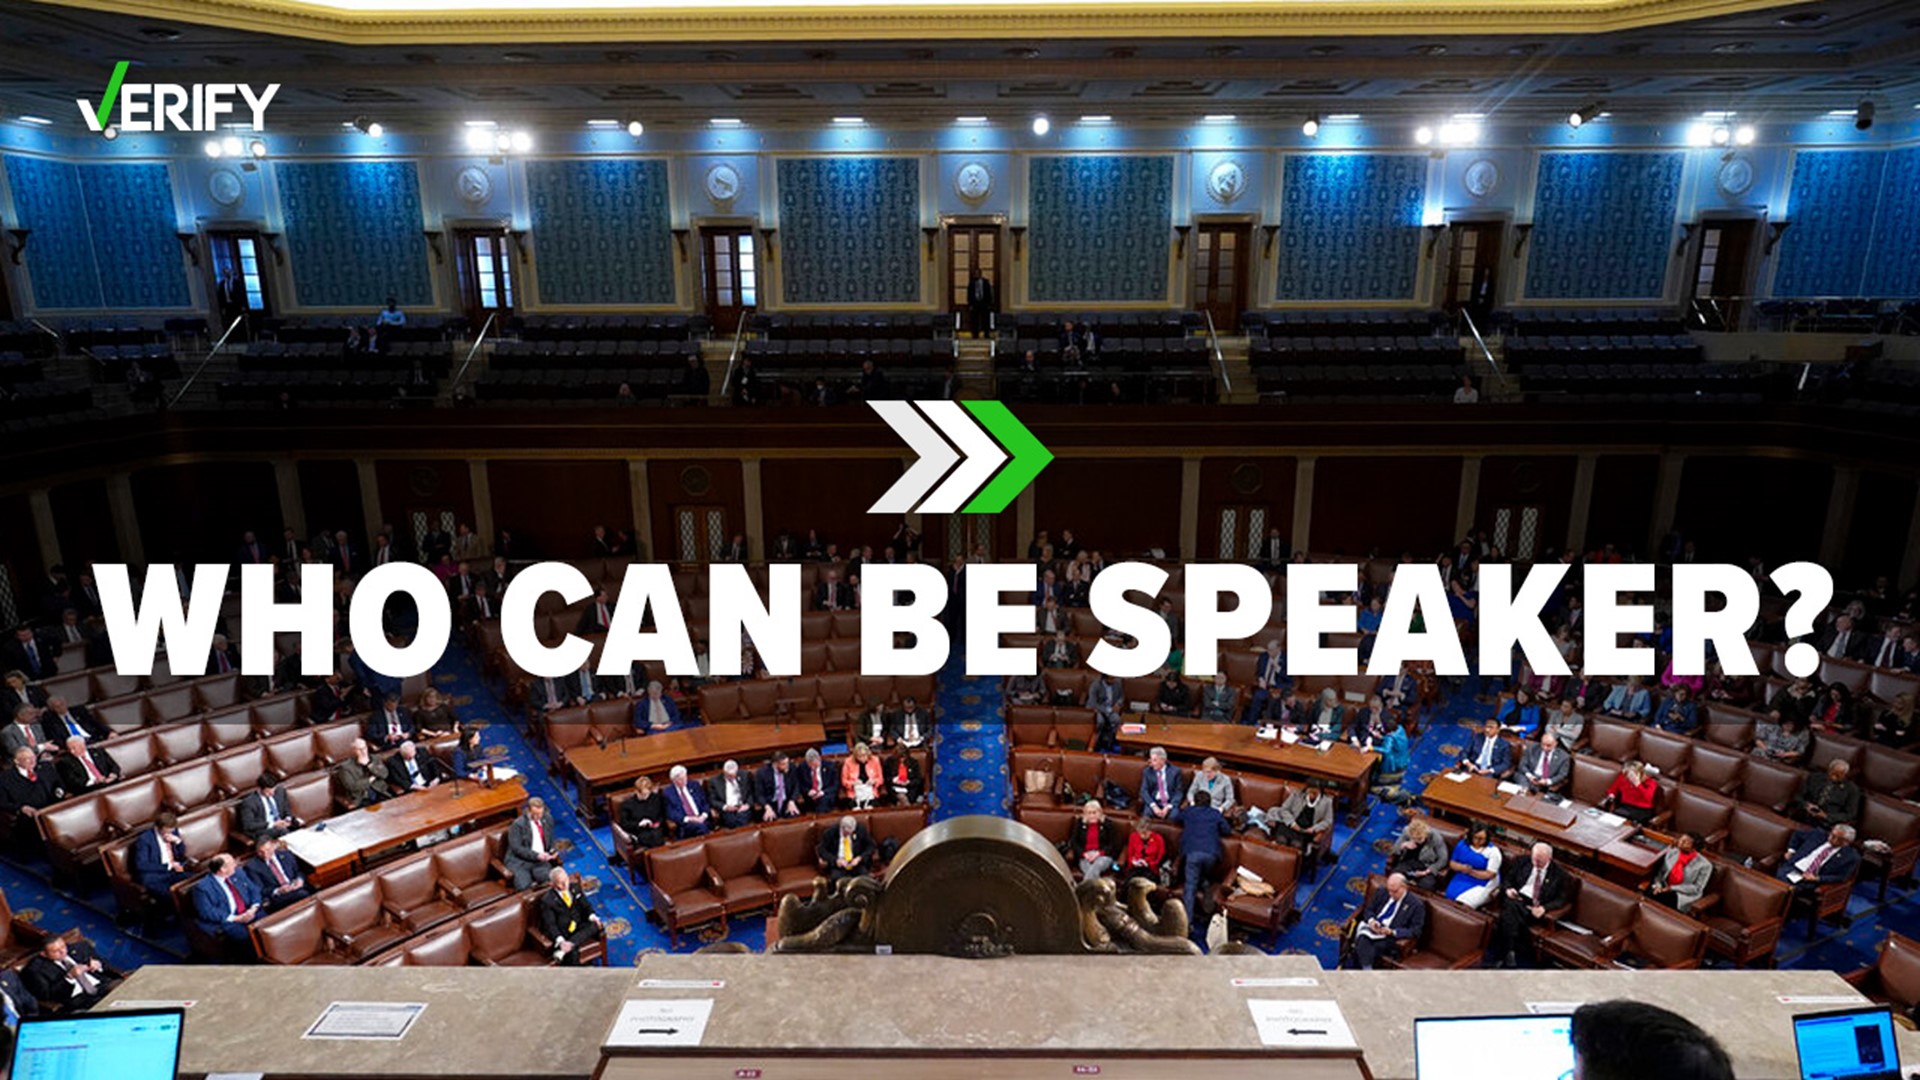 The speaker of the House can technically be anybody – as long as they are nominated and receive a majority of votes by House members.